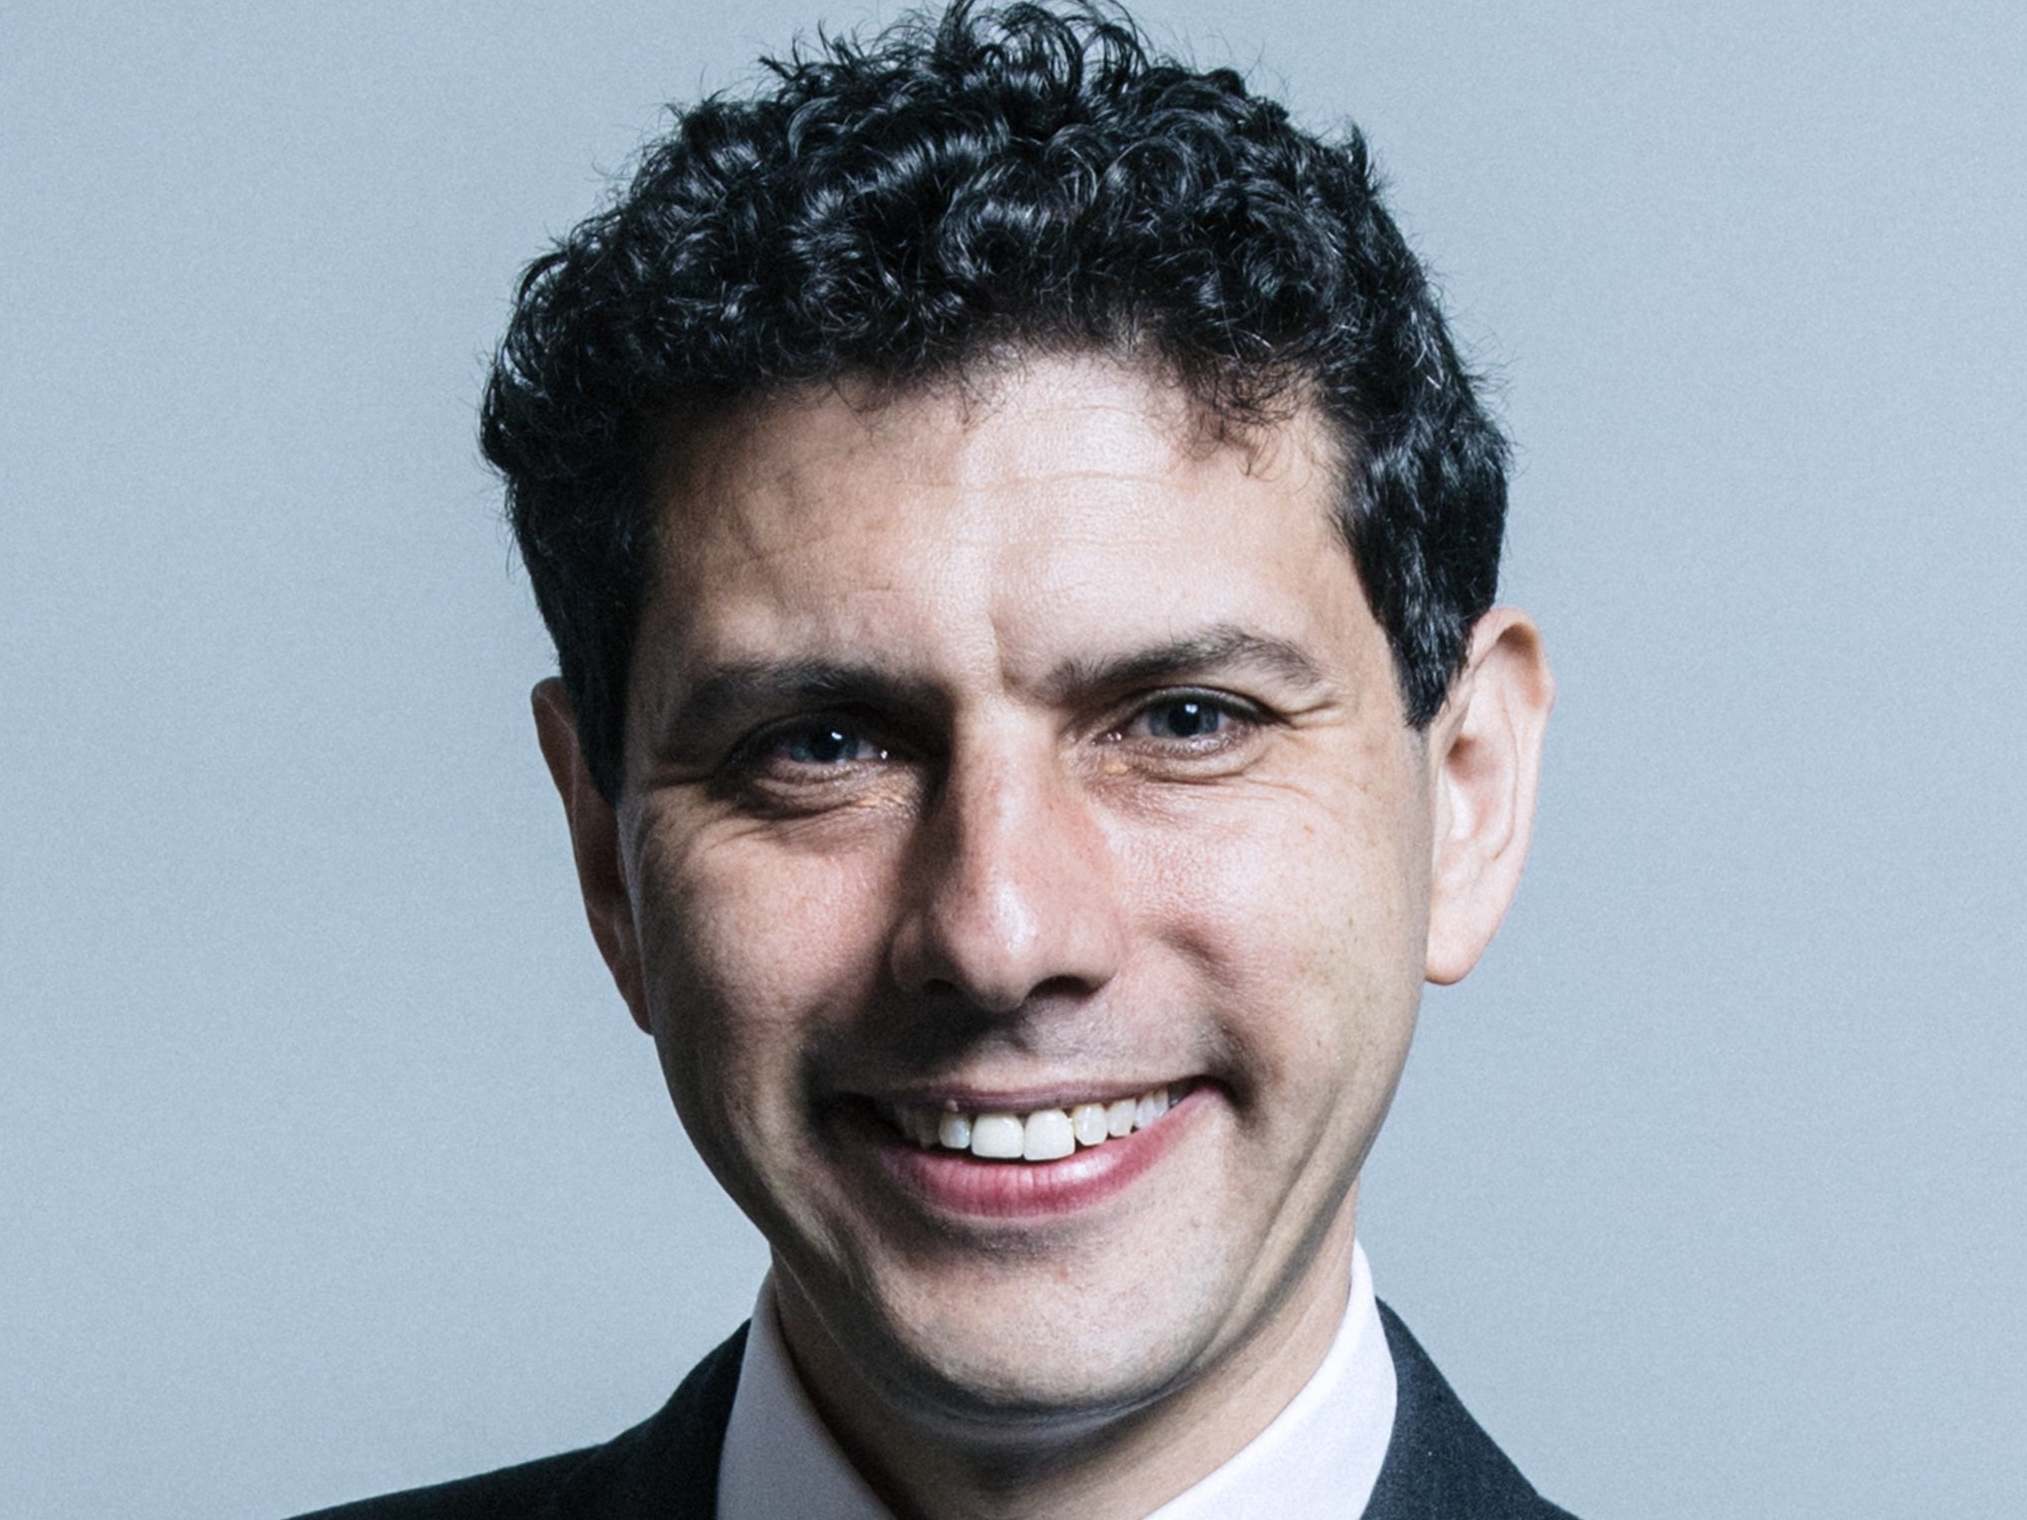 The letter was organised by Labour MP Alex Sobel but has signatories from across the parties